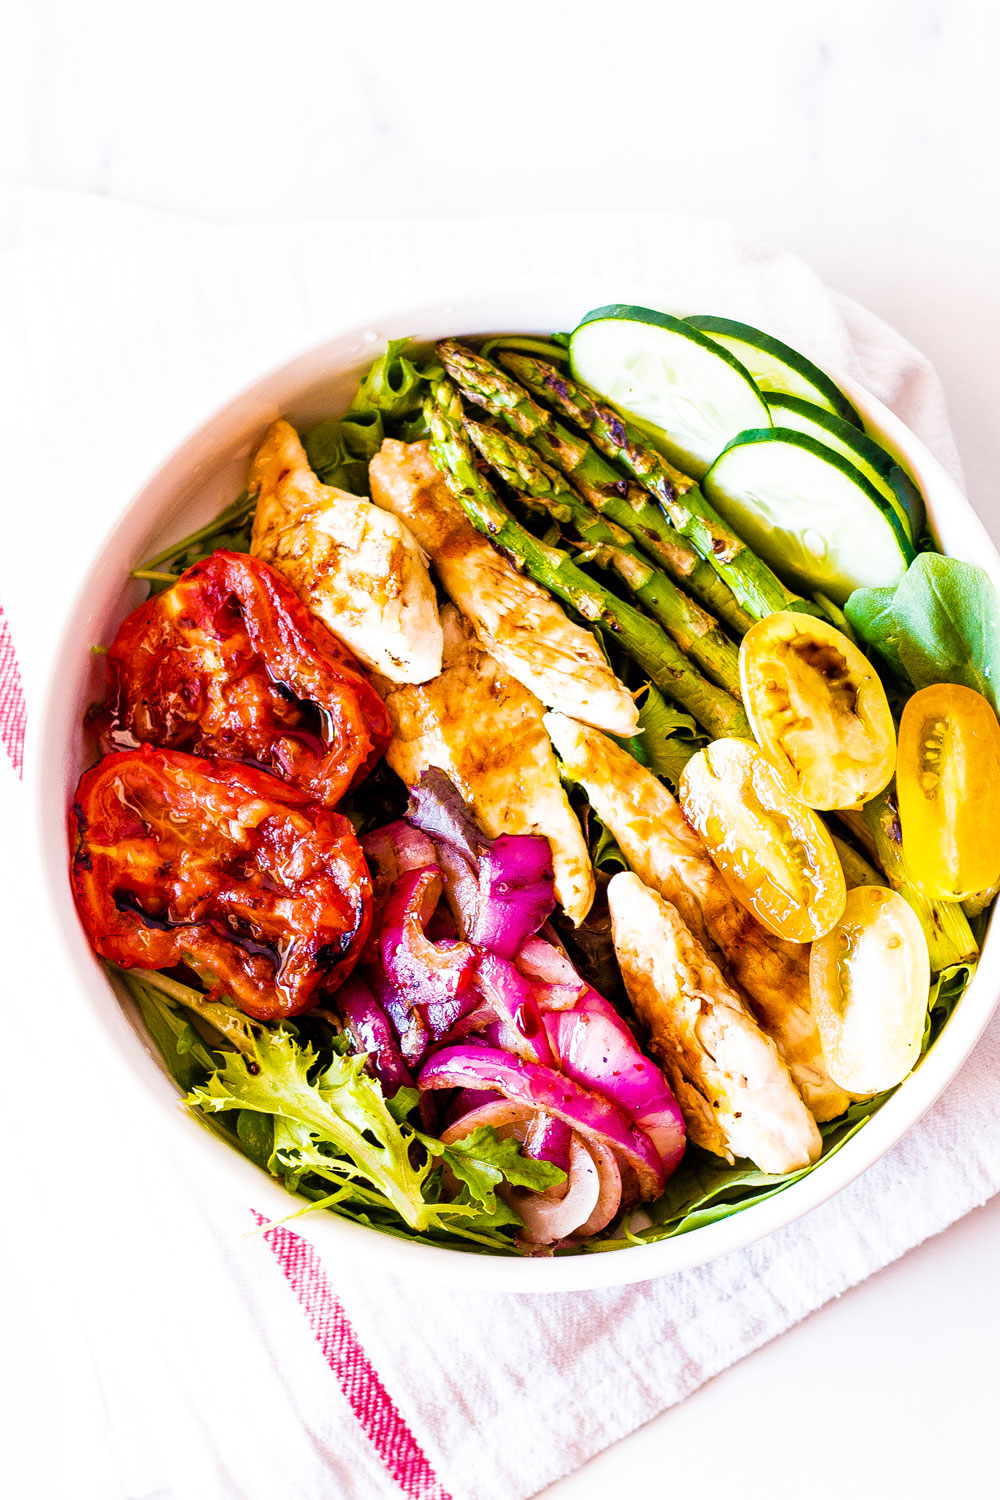 Salads have a reputation for being rather basic, but this grilled chicken and veggies low-carb summer salad is far from being boring! https://www.spotebi.com/recipes/grilled-chicken-vegetable-low-carb-summer-salad/